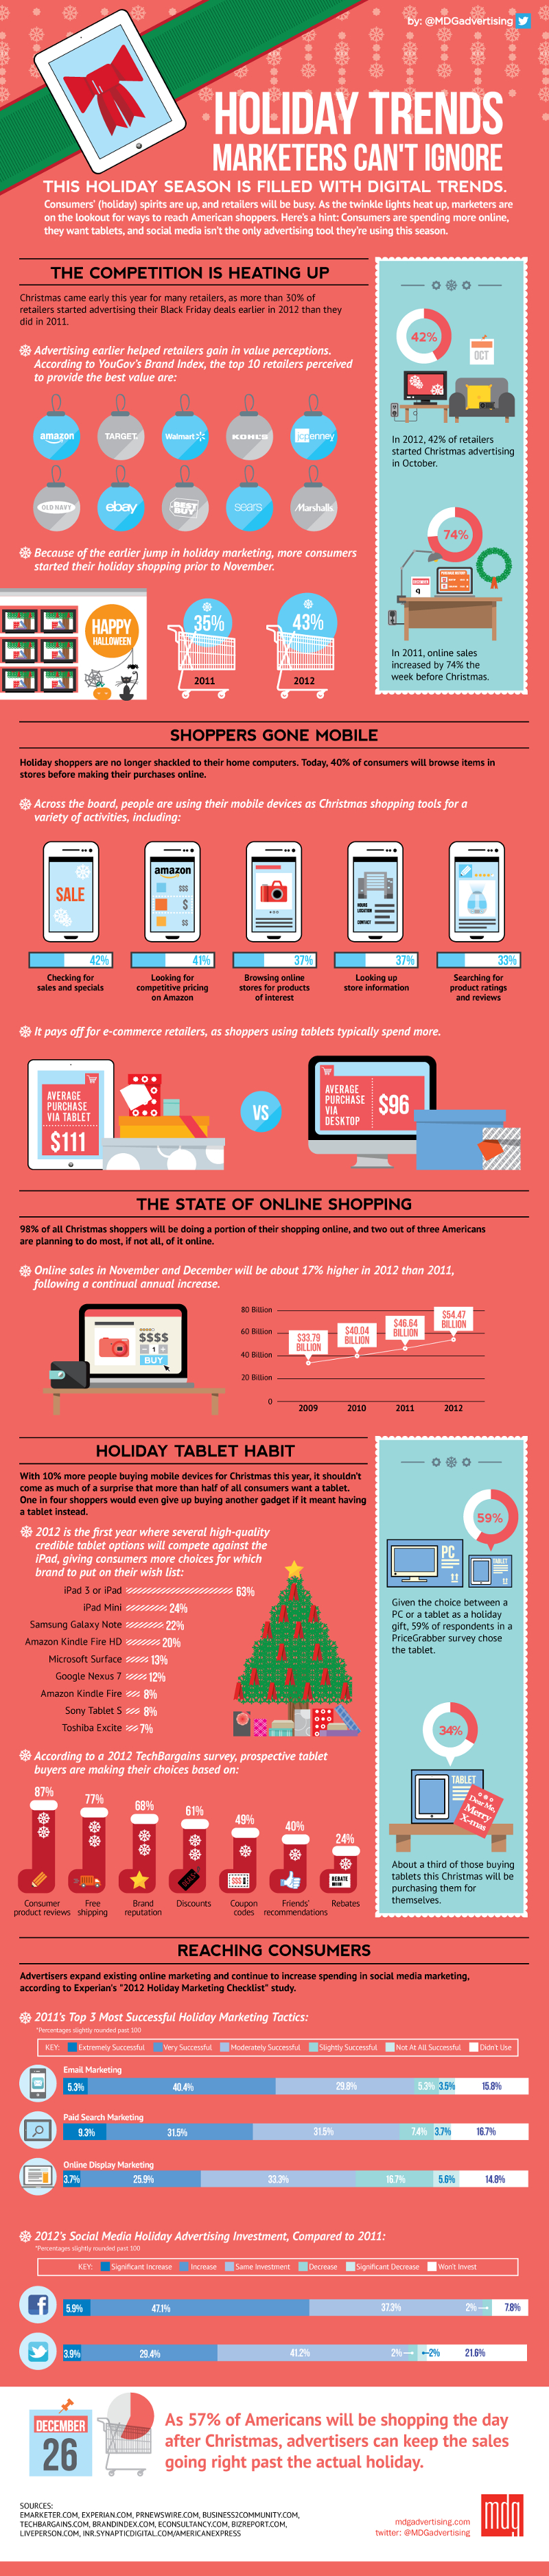 Holiday Trends for Marketing